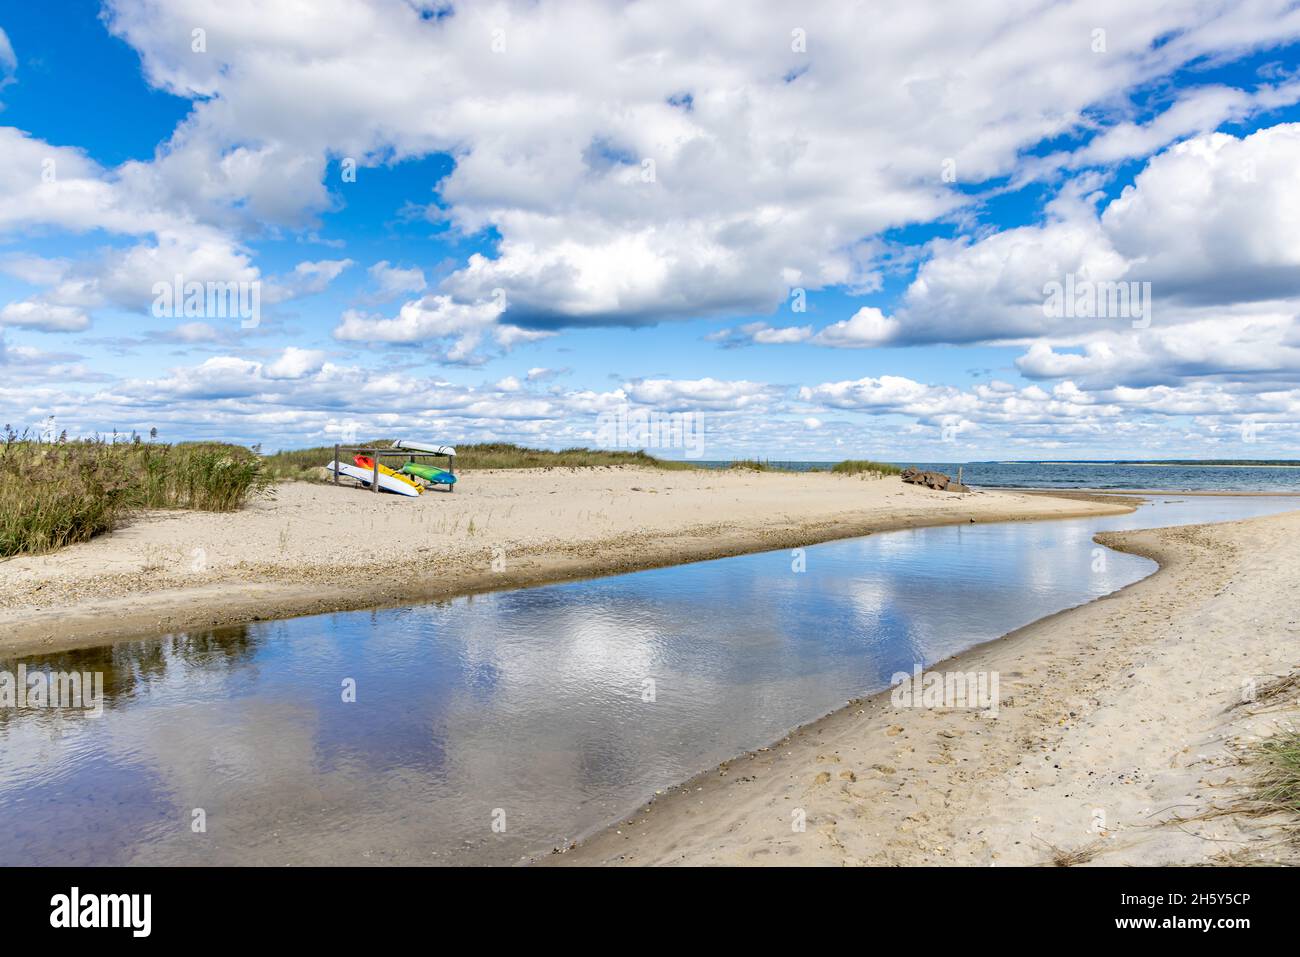 Landscape with water and kayaks at Fresh Pond Park in Amagansett, NY Stock Photo